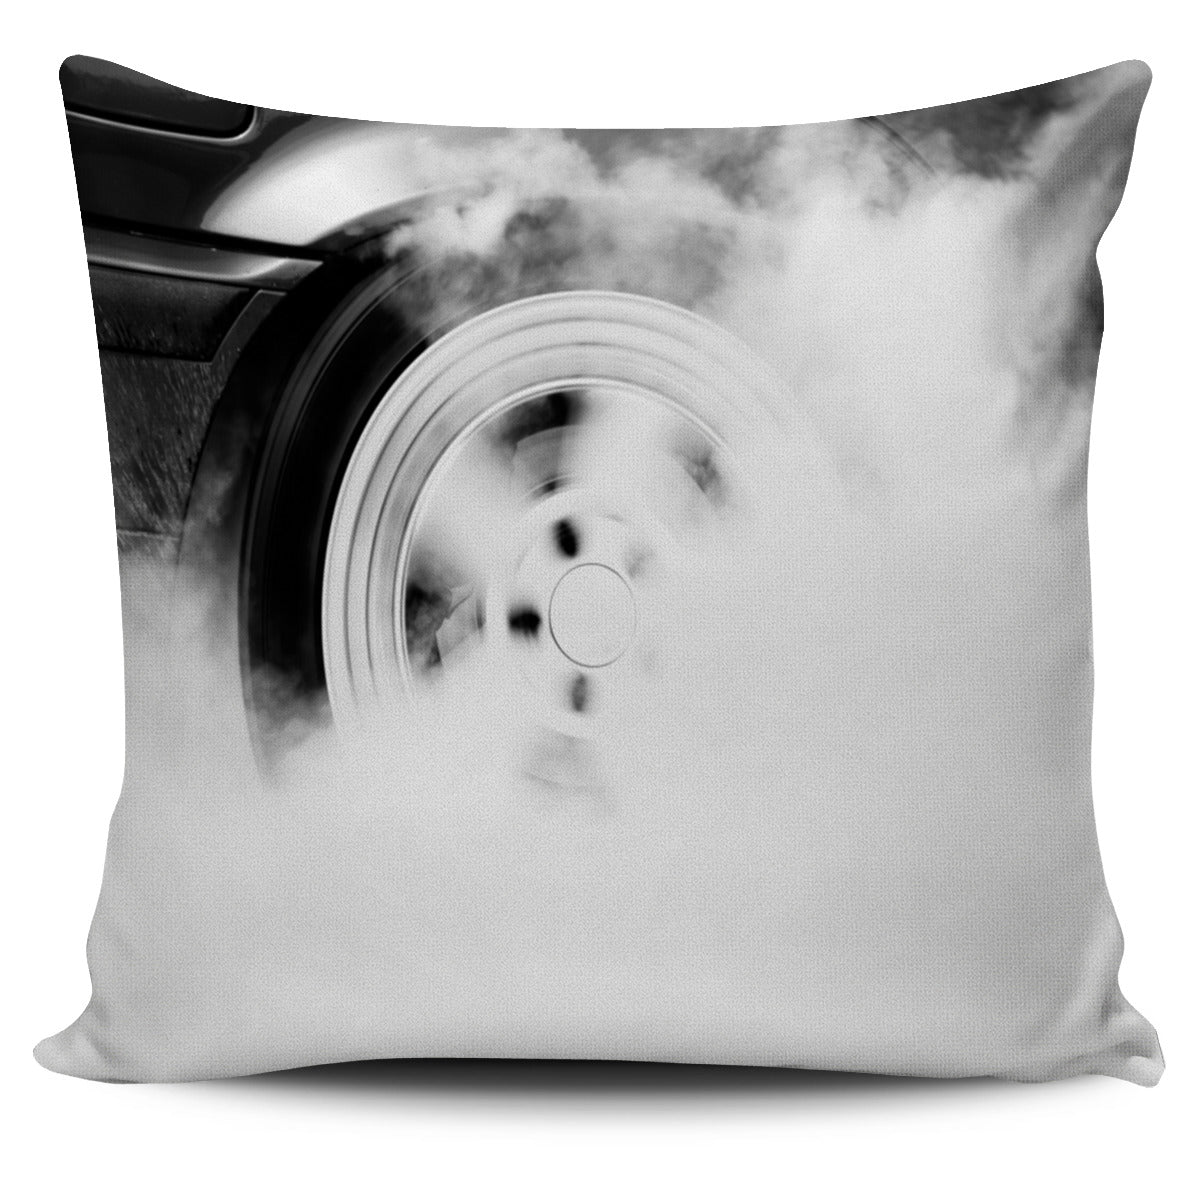 Racing Pillow Cover V11